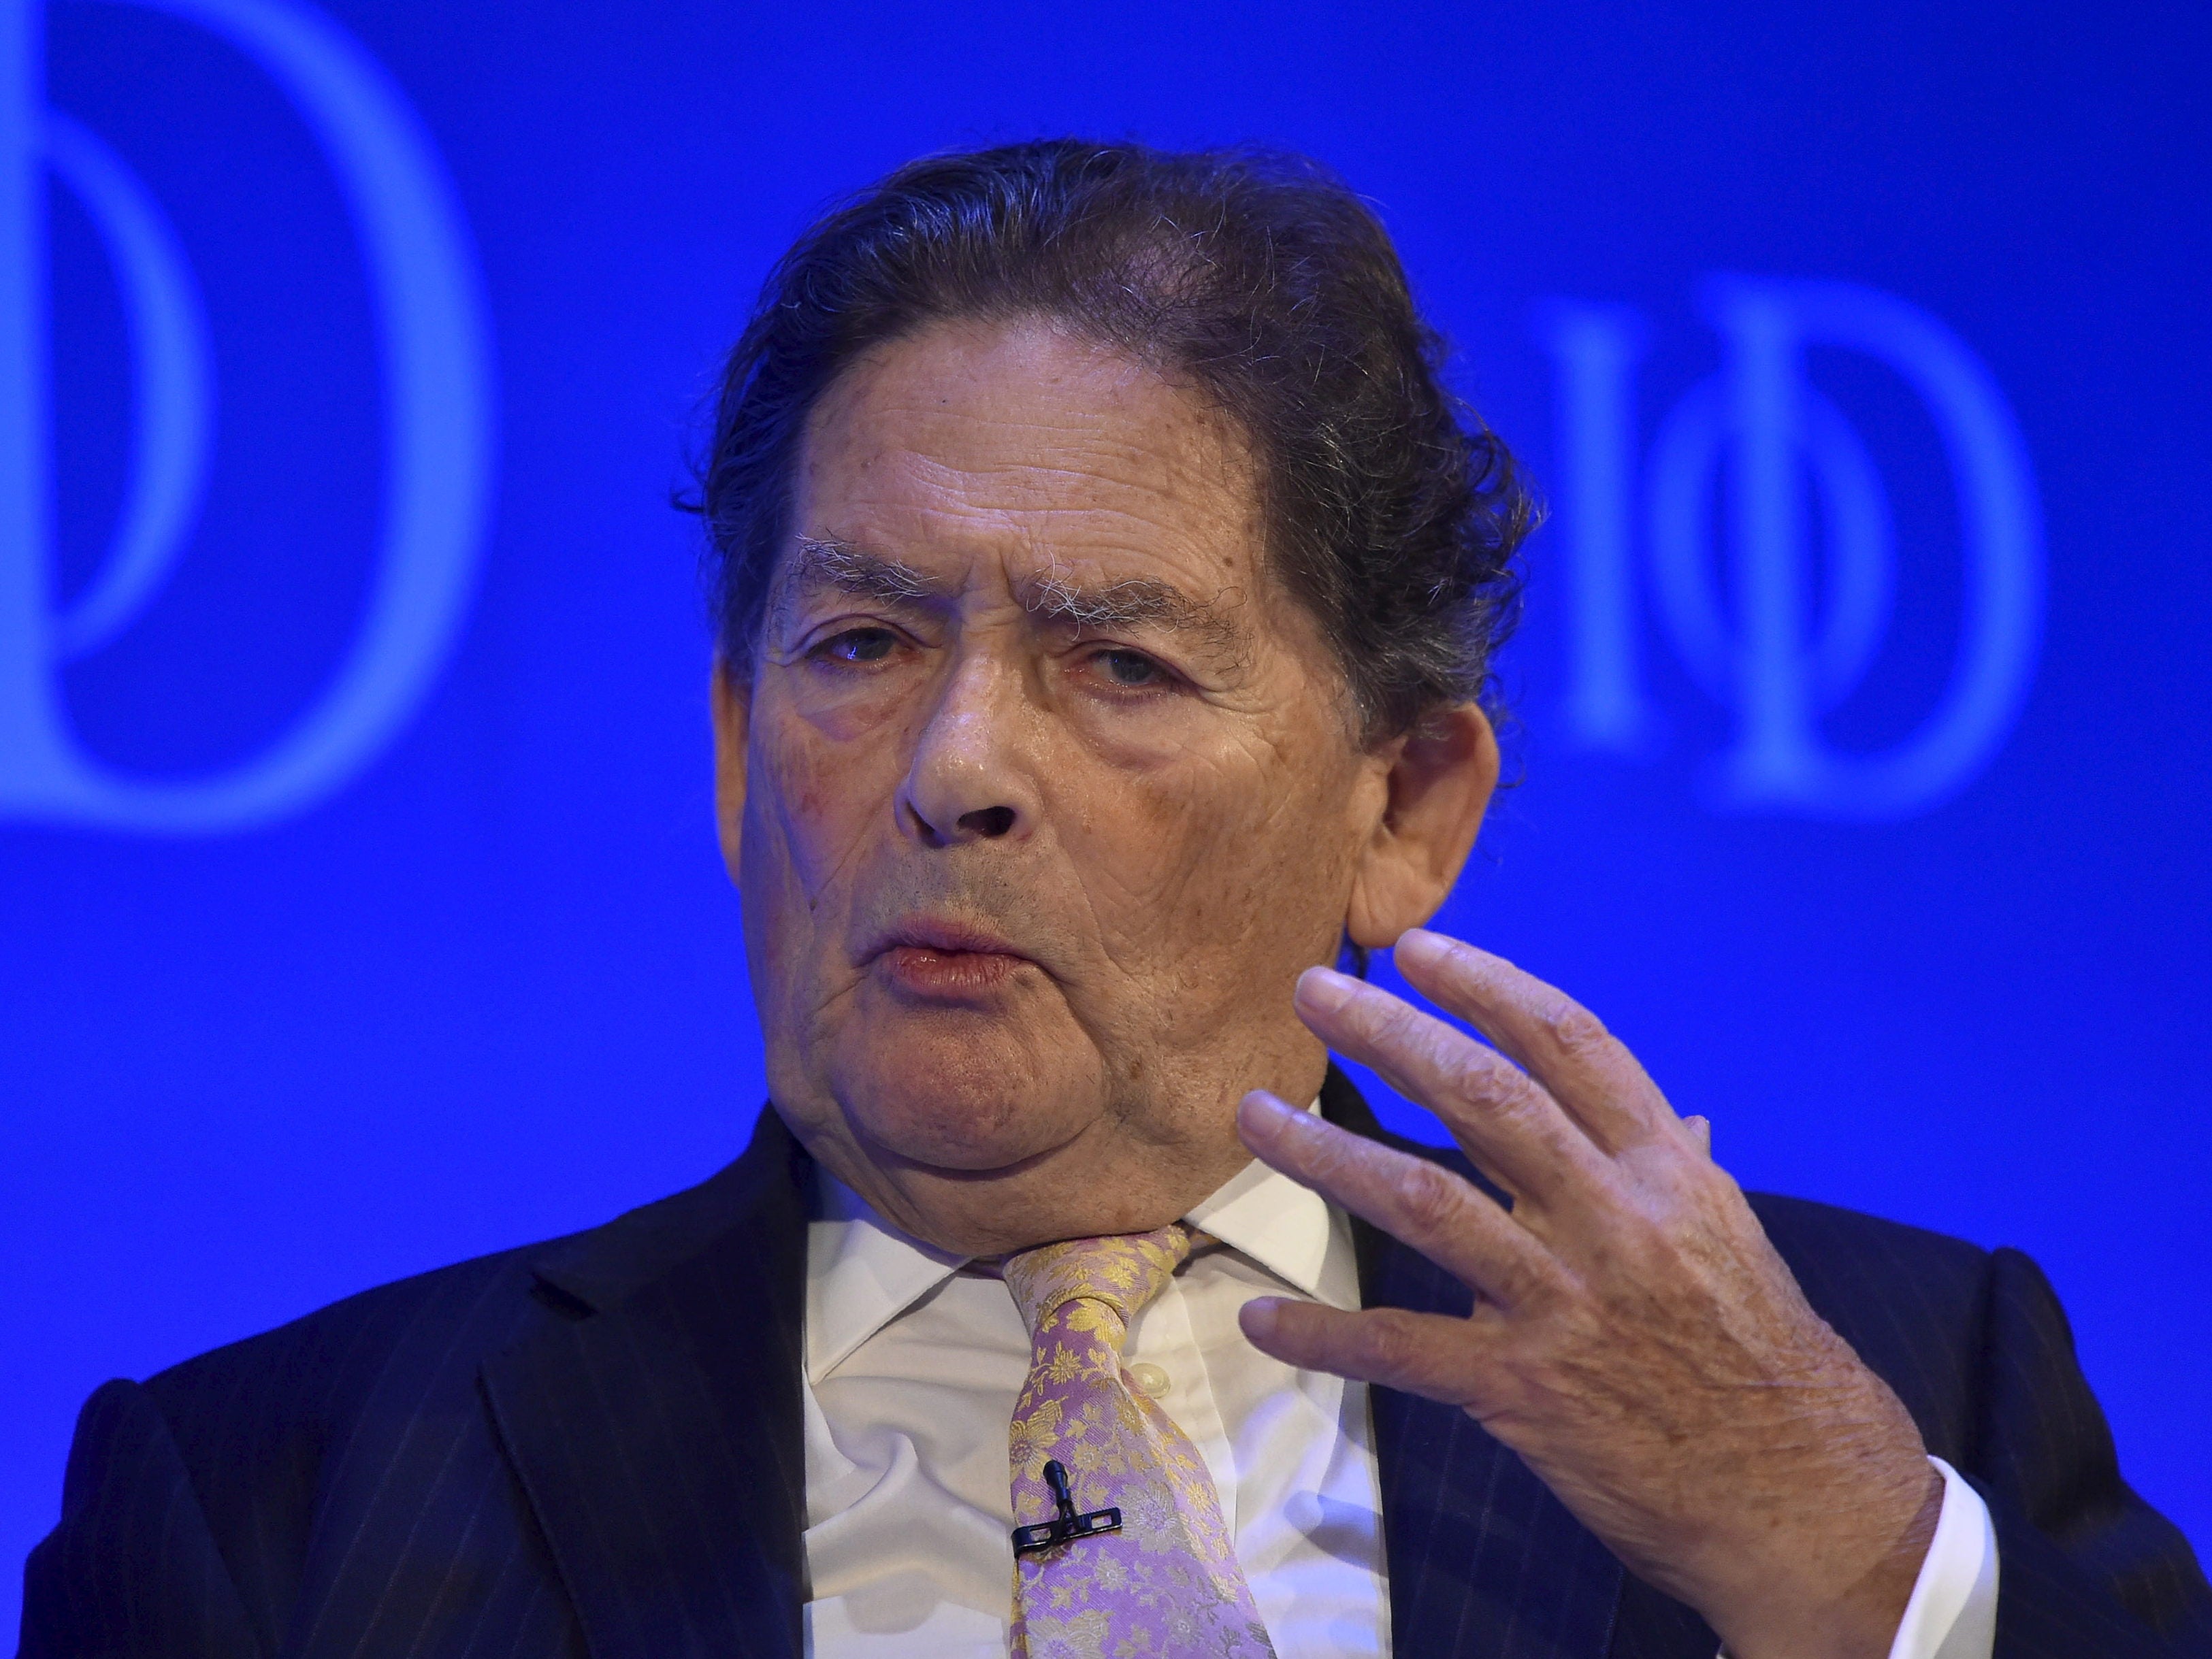 Today programme broke accuracy guidelines in interview with climate change sceptic Lord Lawson, Ofcom rules